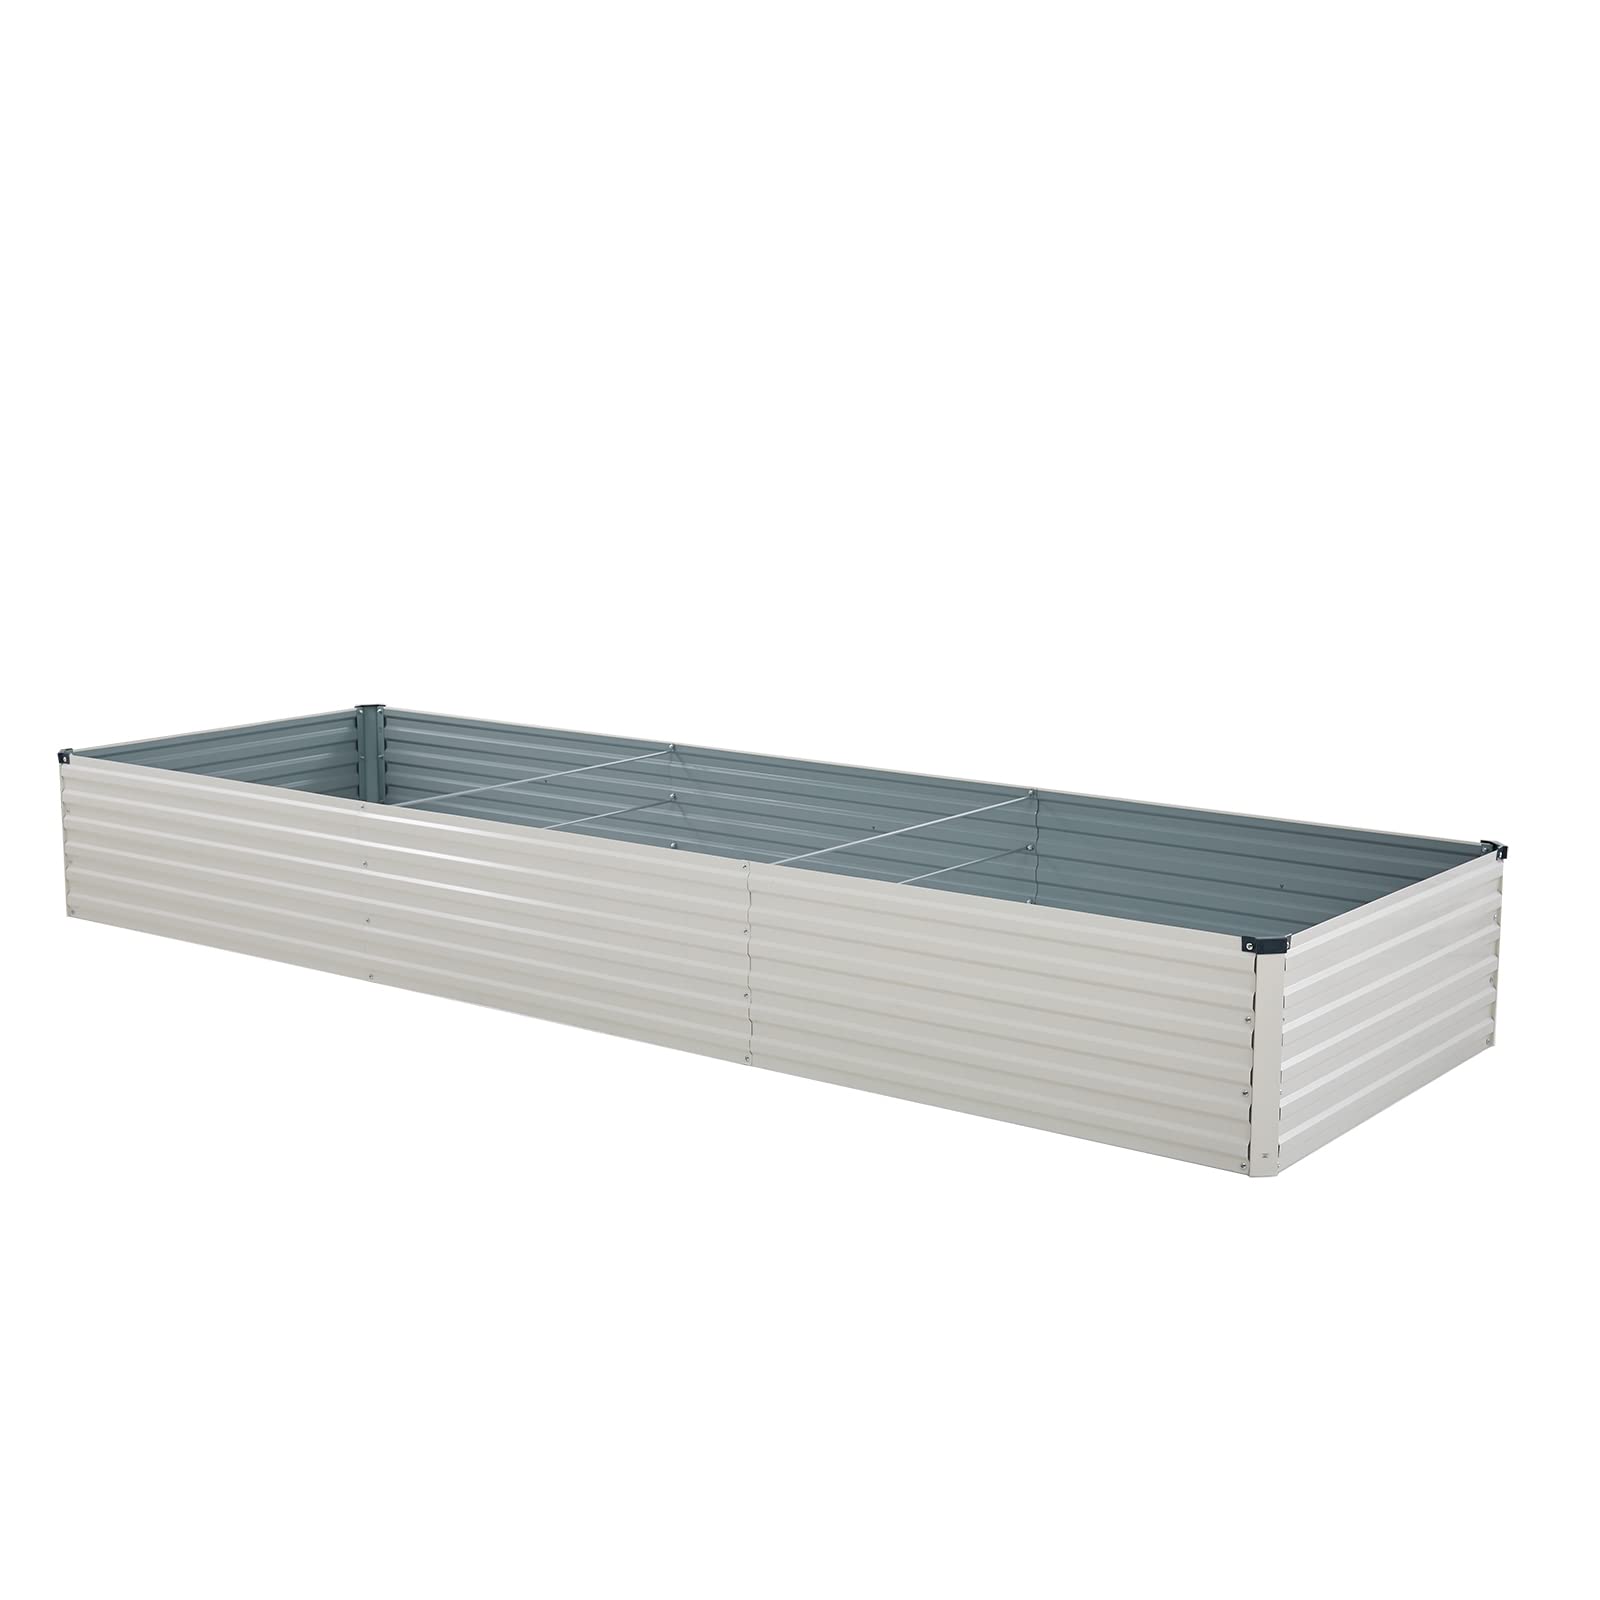 Zunatu 12X4X15Ft Galvanized Raised Garden Bed,Outdoor Planter Box Metal Patio Kit Planting Bed For Vegetables Flowers And Succul